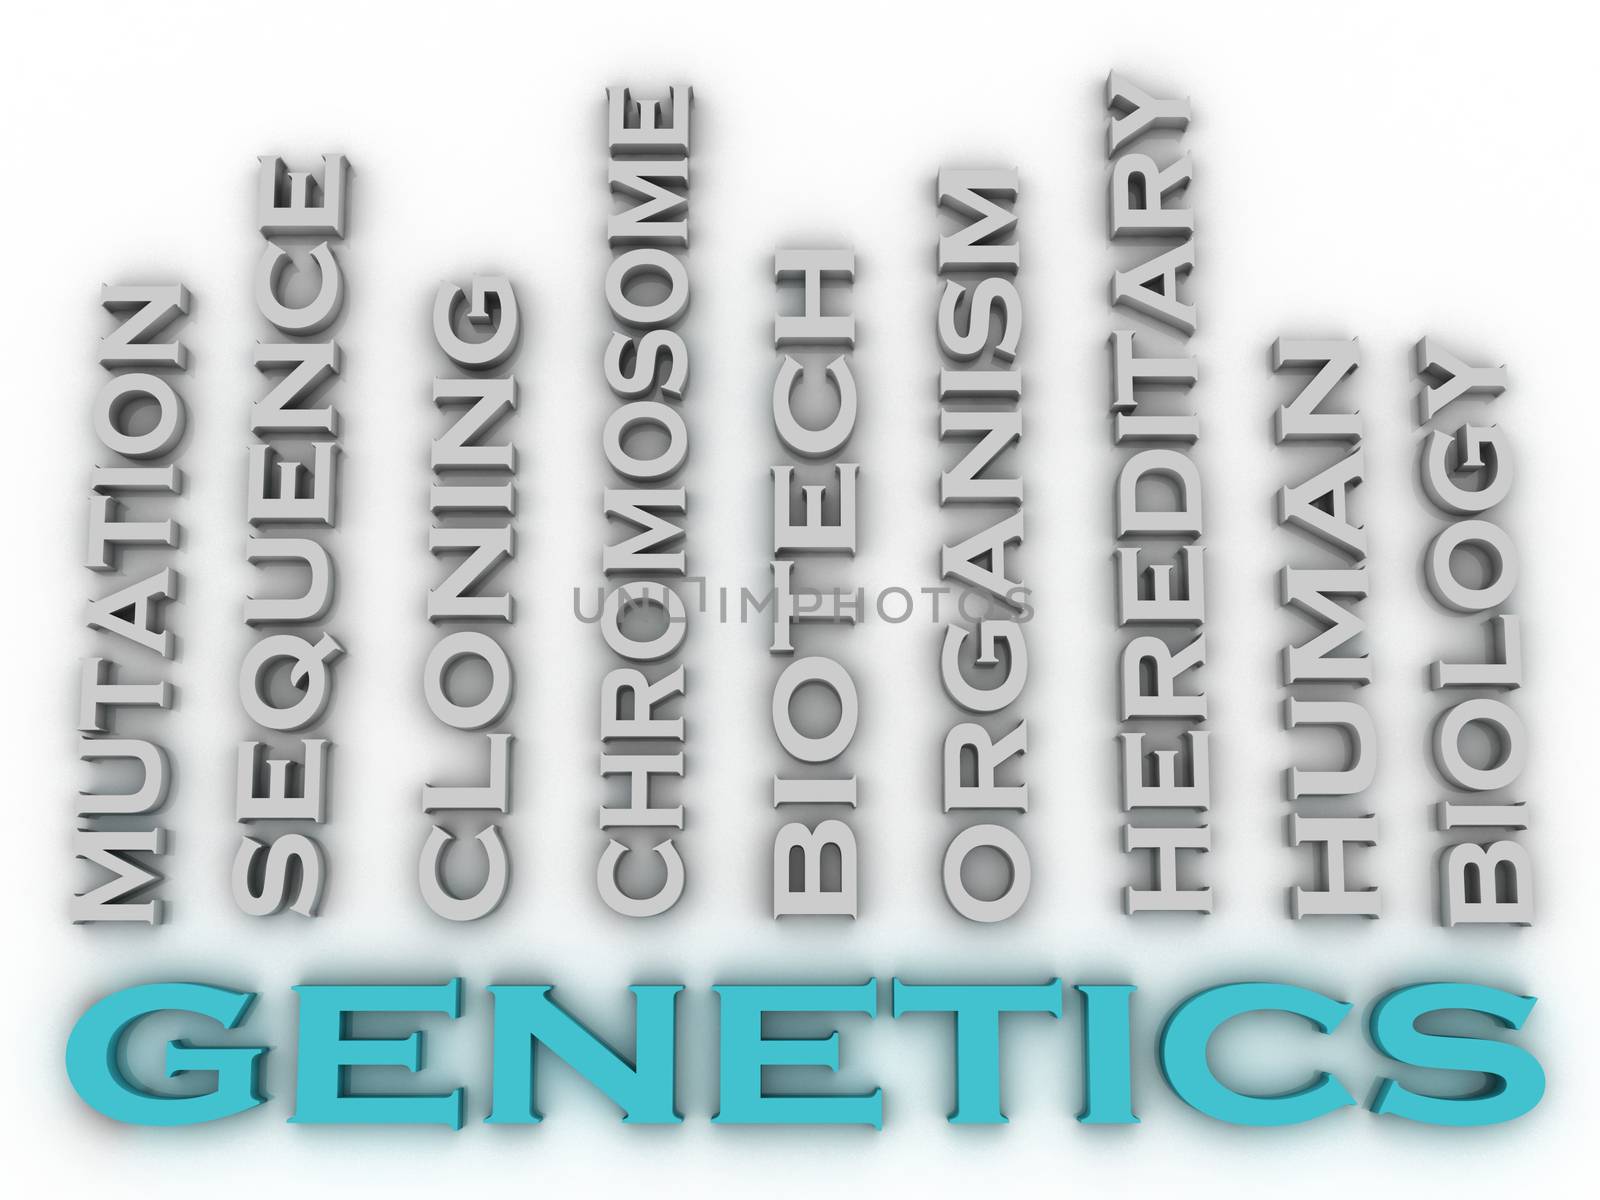 3d image Genetics issues concept word cloud background by dacasdo